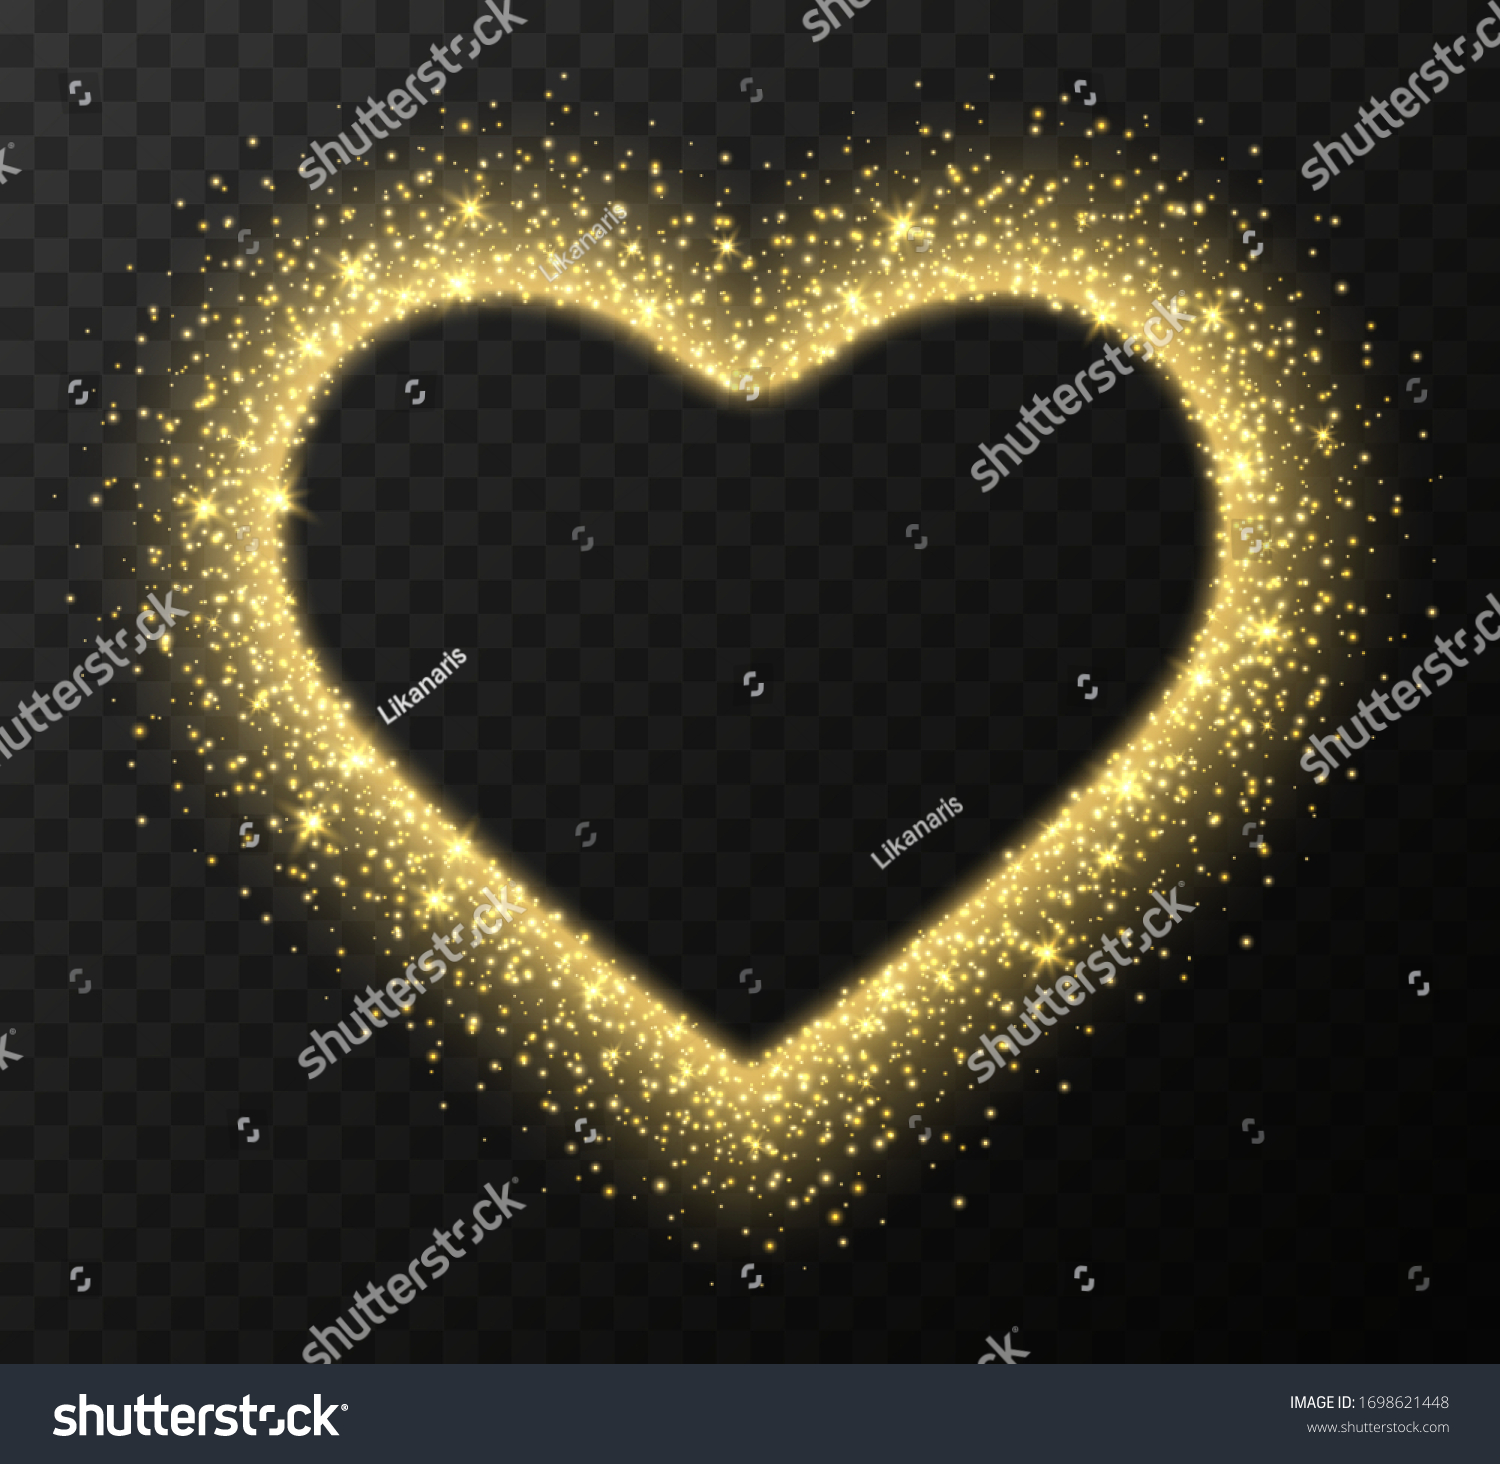 Golden Heart Frame Sparkles Flares Abstract Stock Vector (Royalty Free ...